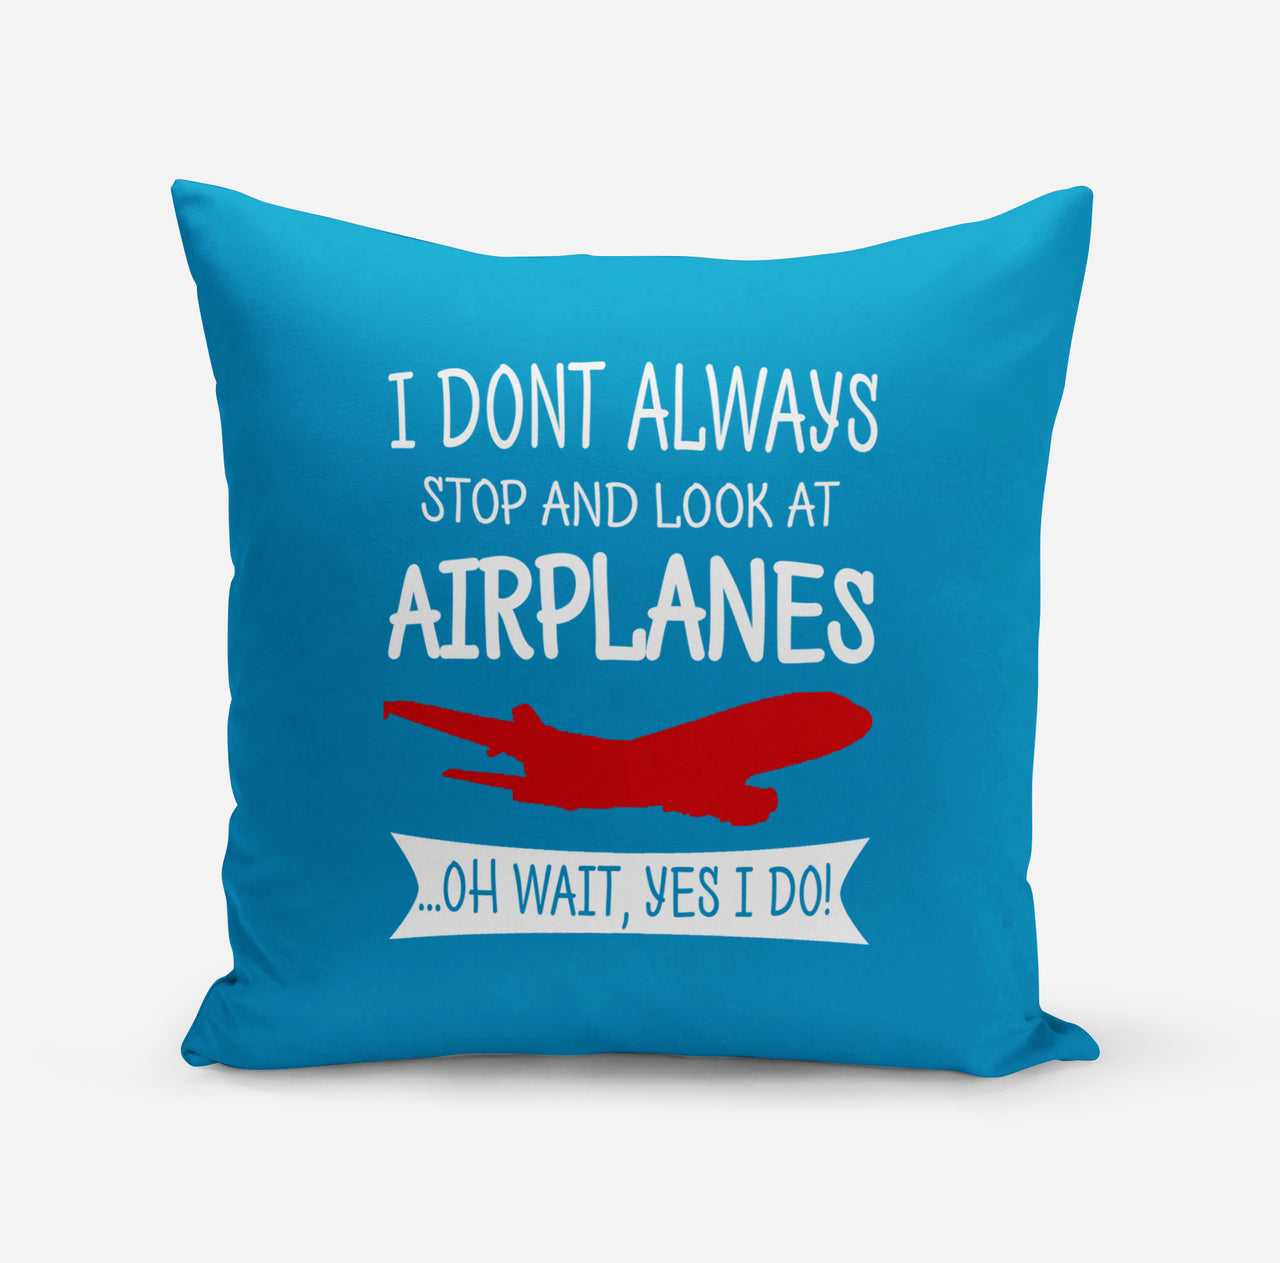 I Don't Always Stop and Look at Airplanes Designed Pillows